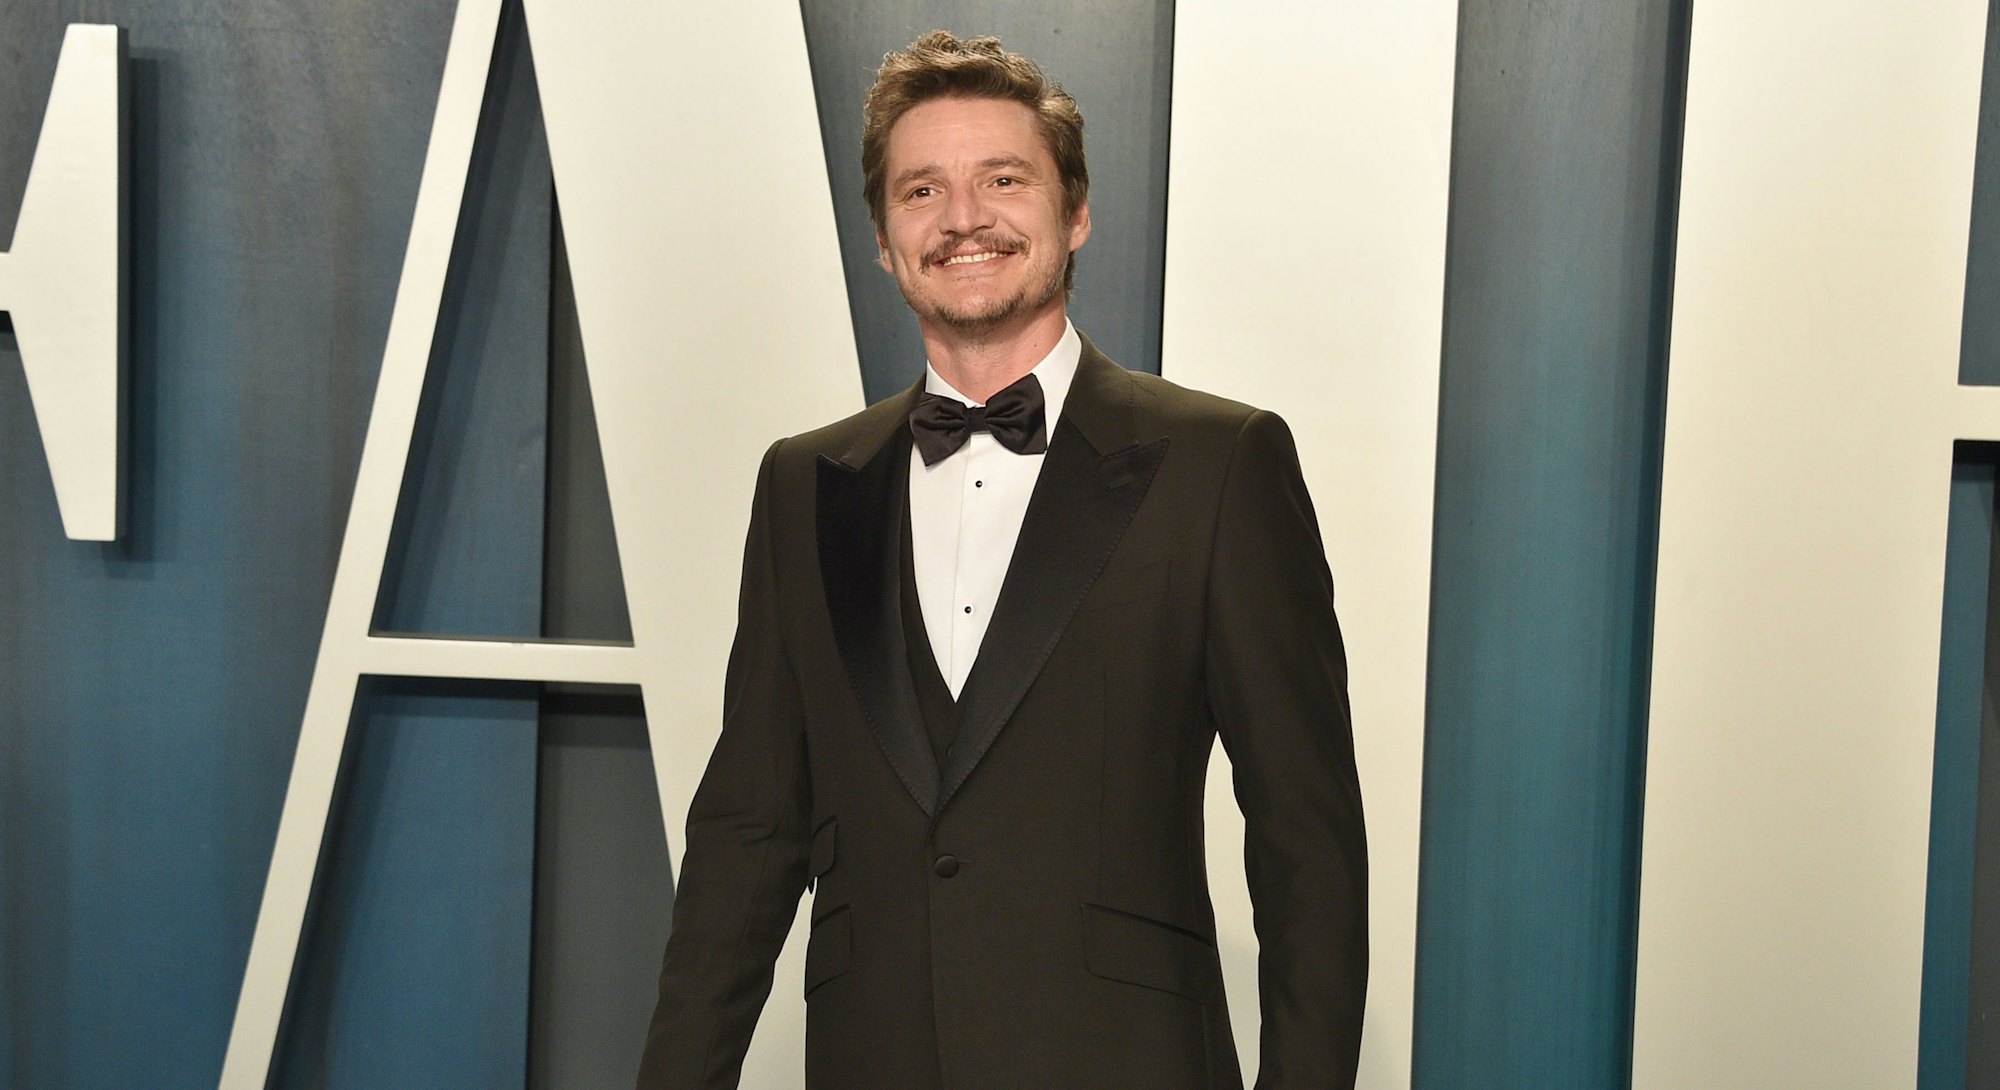 BEVERLY HILLS, CALIFORNIA - FEBRUARY 09: Pedro Pascal attends the 2020 Vanity Fair Oscar Party at Wa...